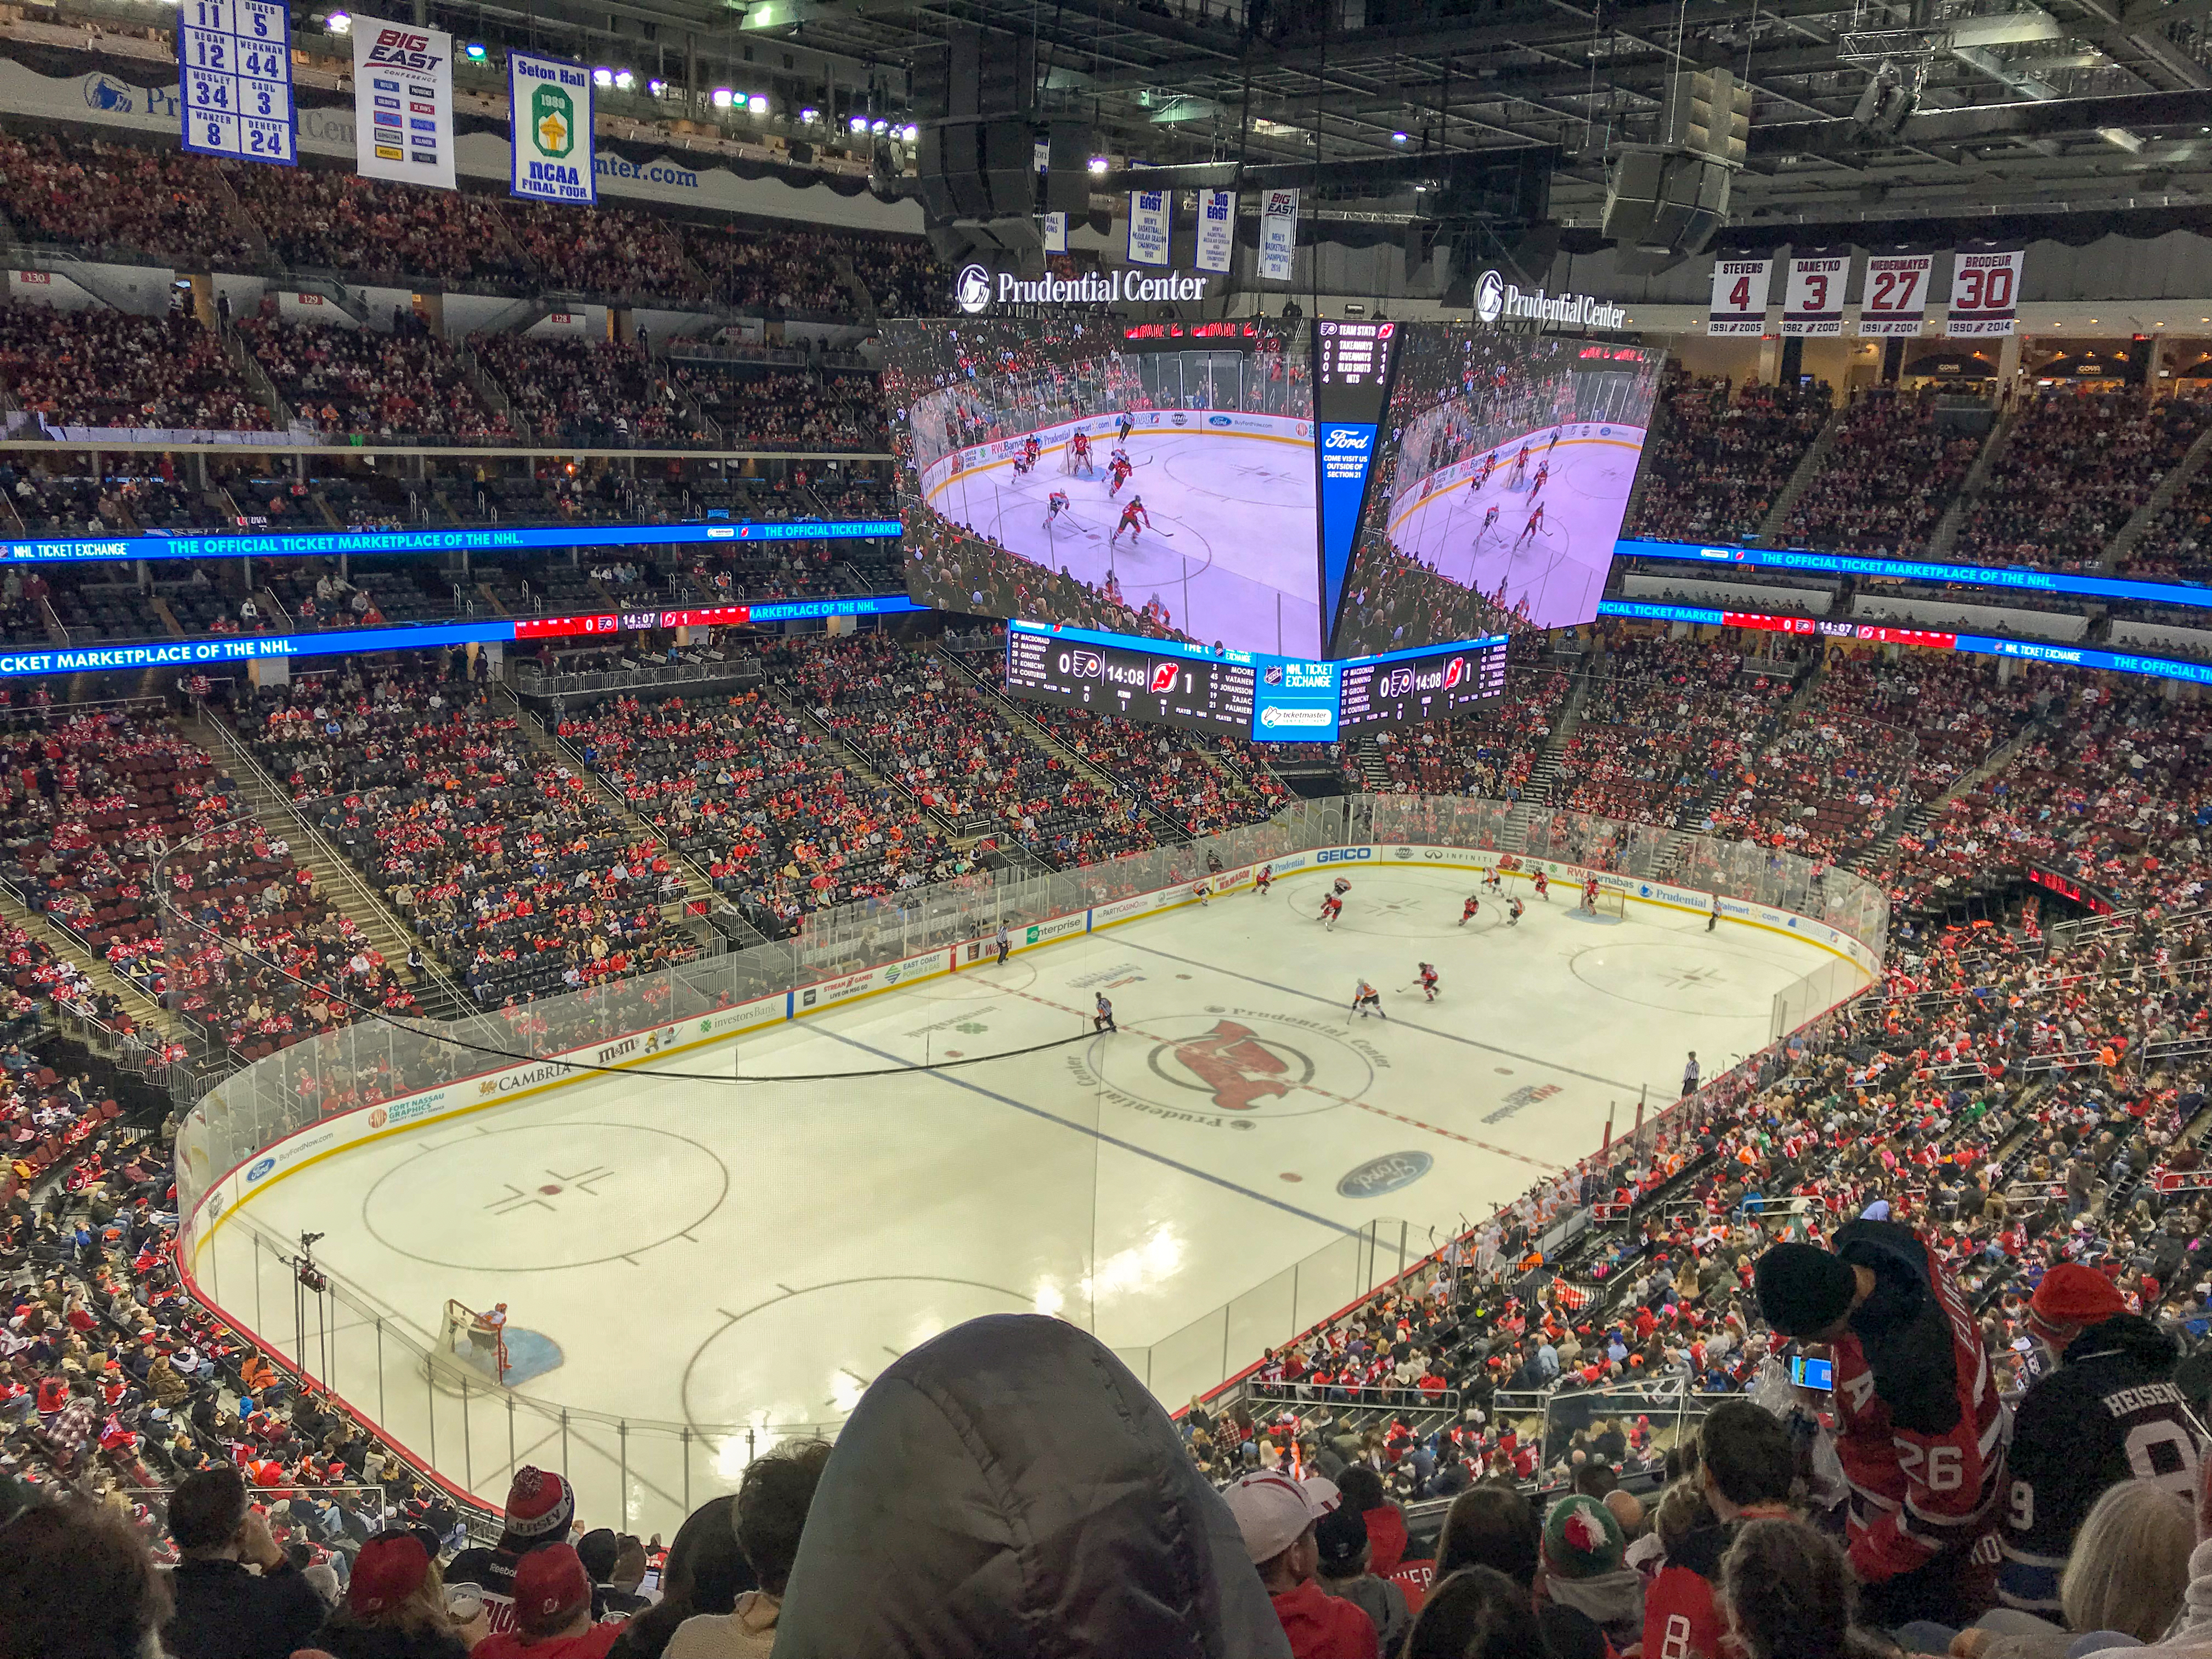 A picture of the Prudential Center in Newark, NJ during a New Jersey Devils hockey game